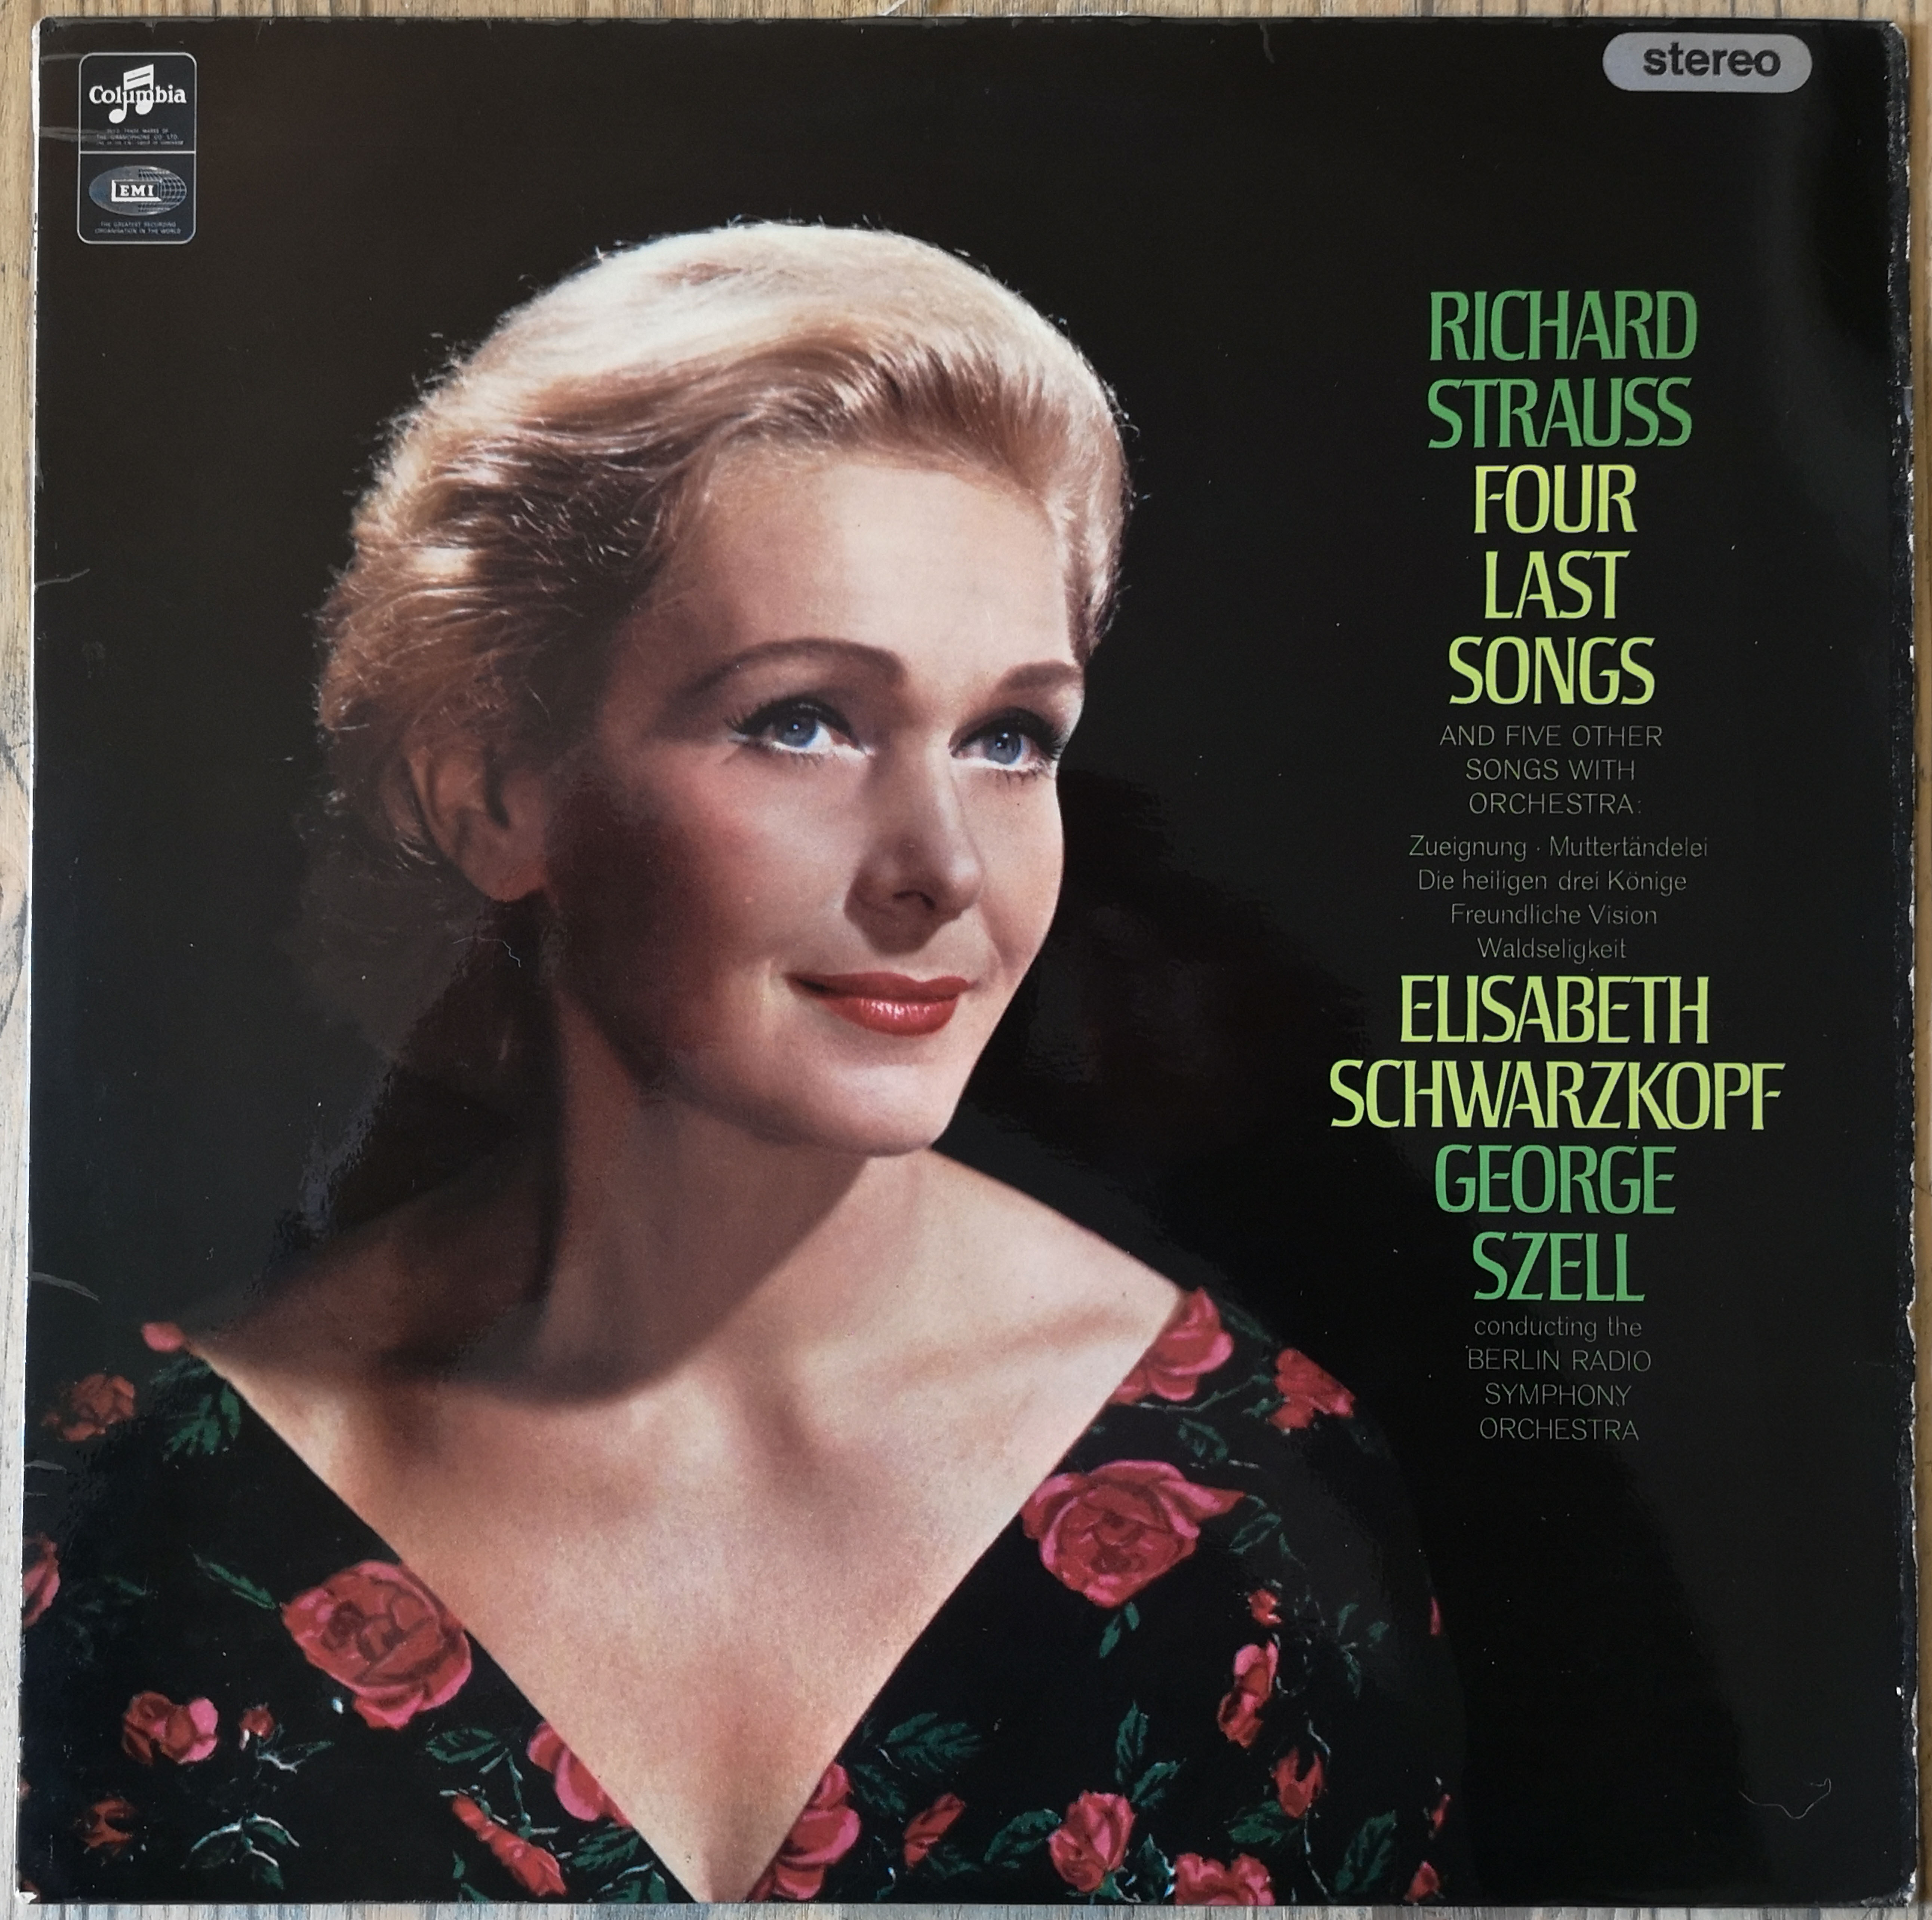 ERC074 Richard Strauss - Four Last Songs performed by Elisabeth Schwarzkopf with George Szell Conducting The Berlin Radio Symphony Orchestra